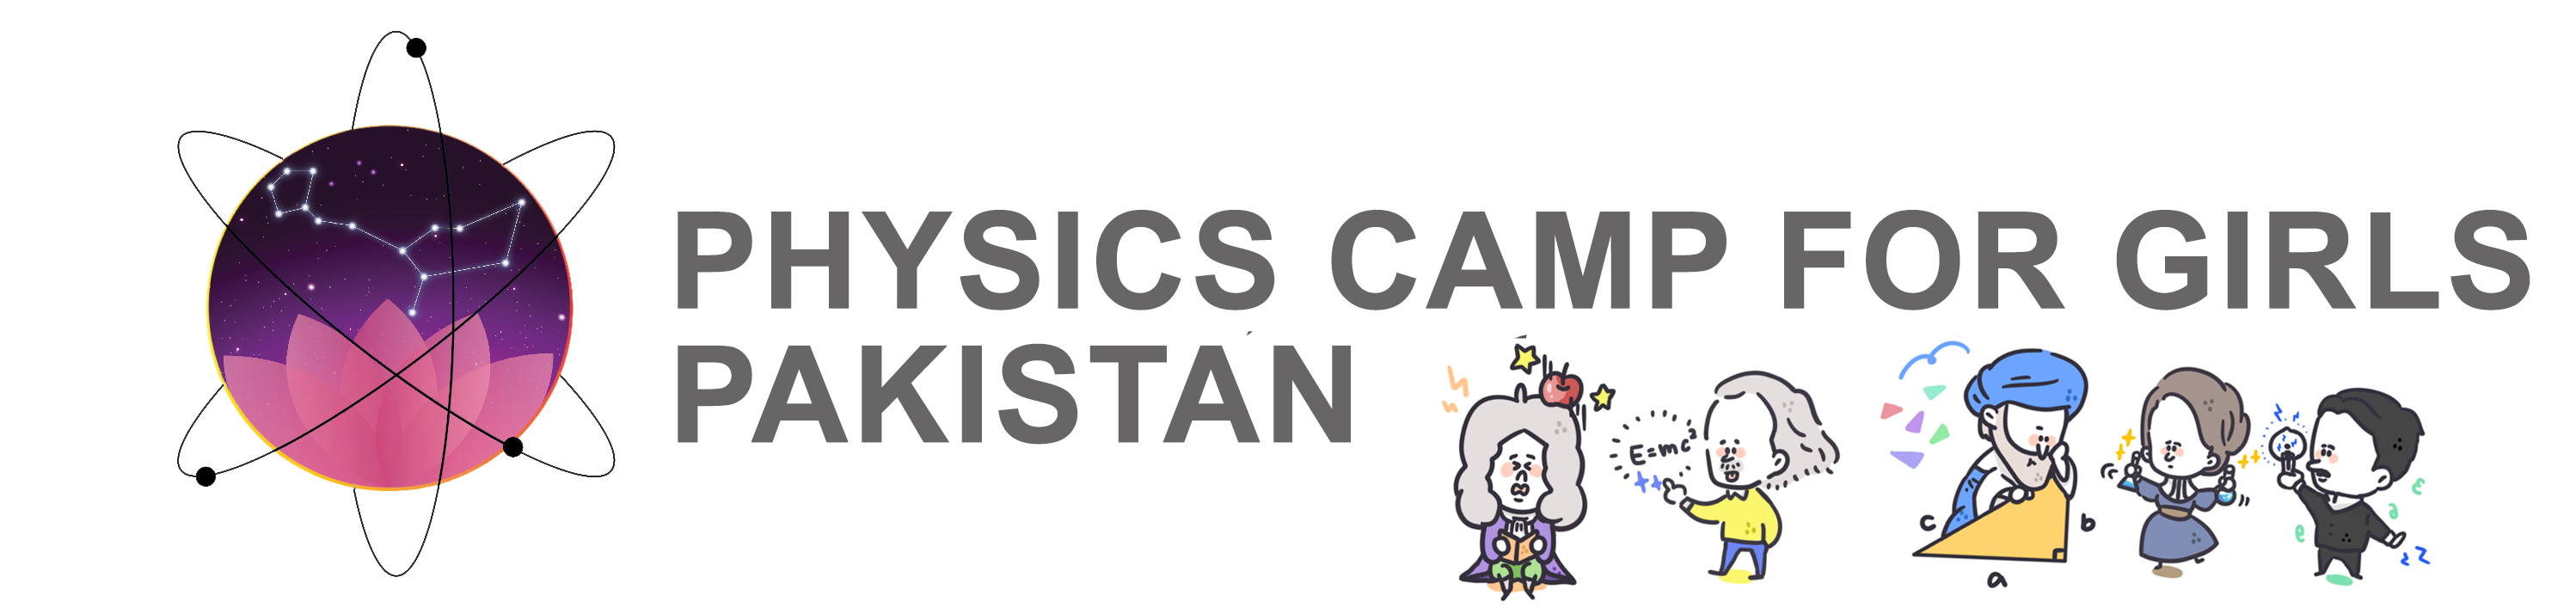 Physics Camp for girls